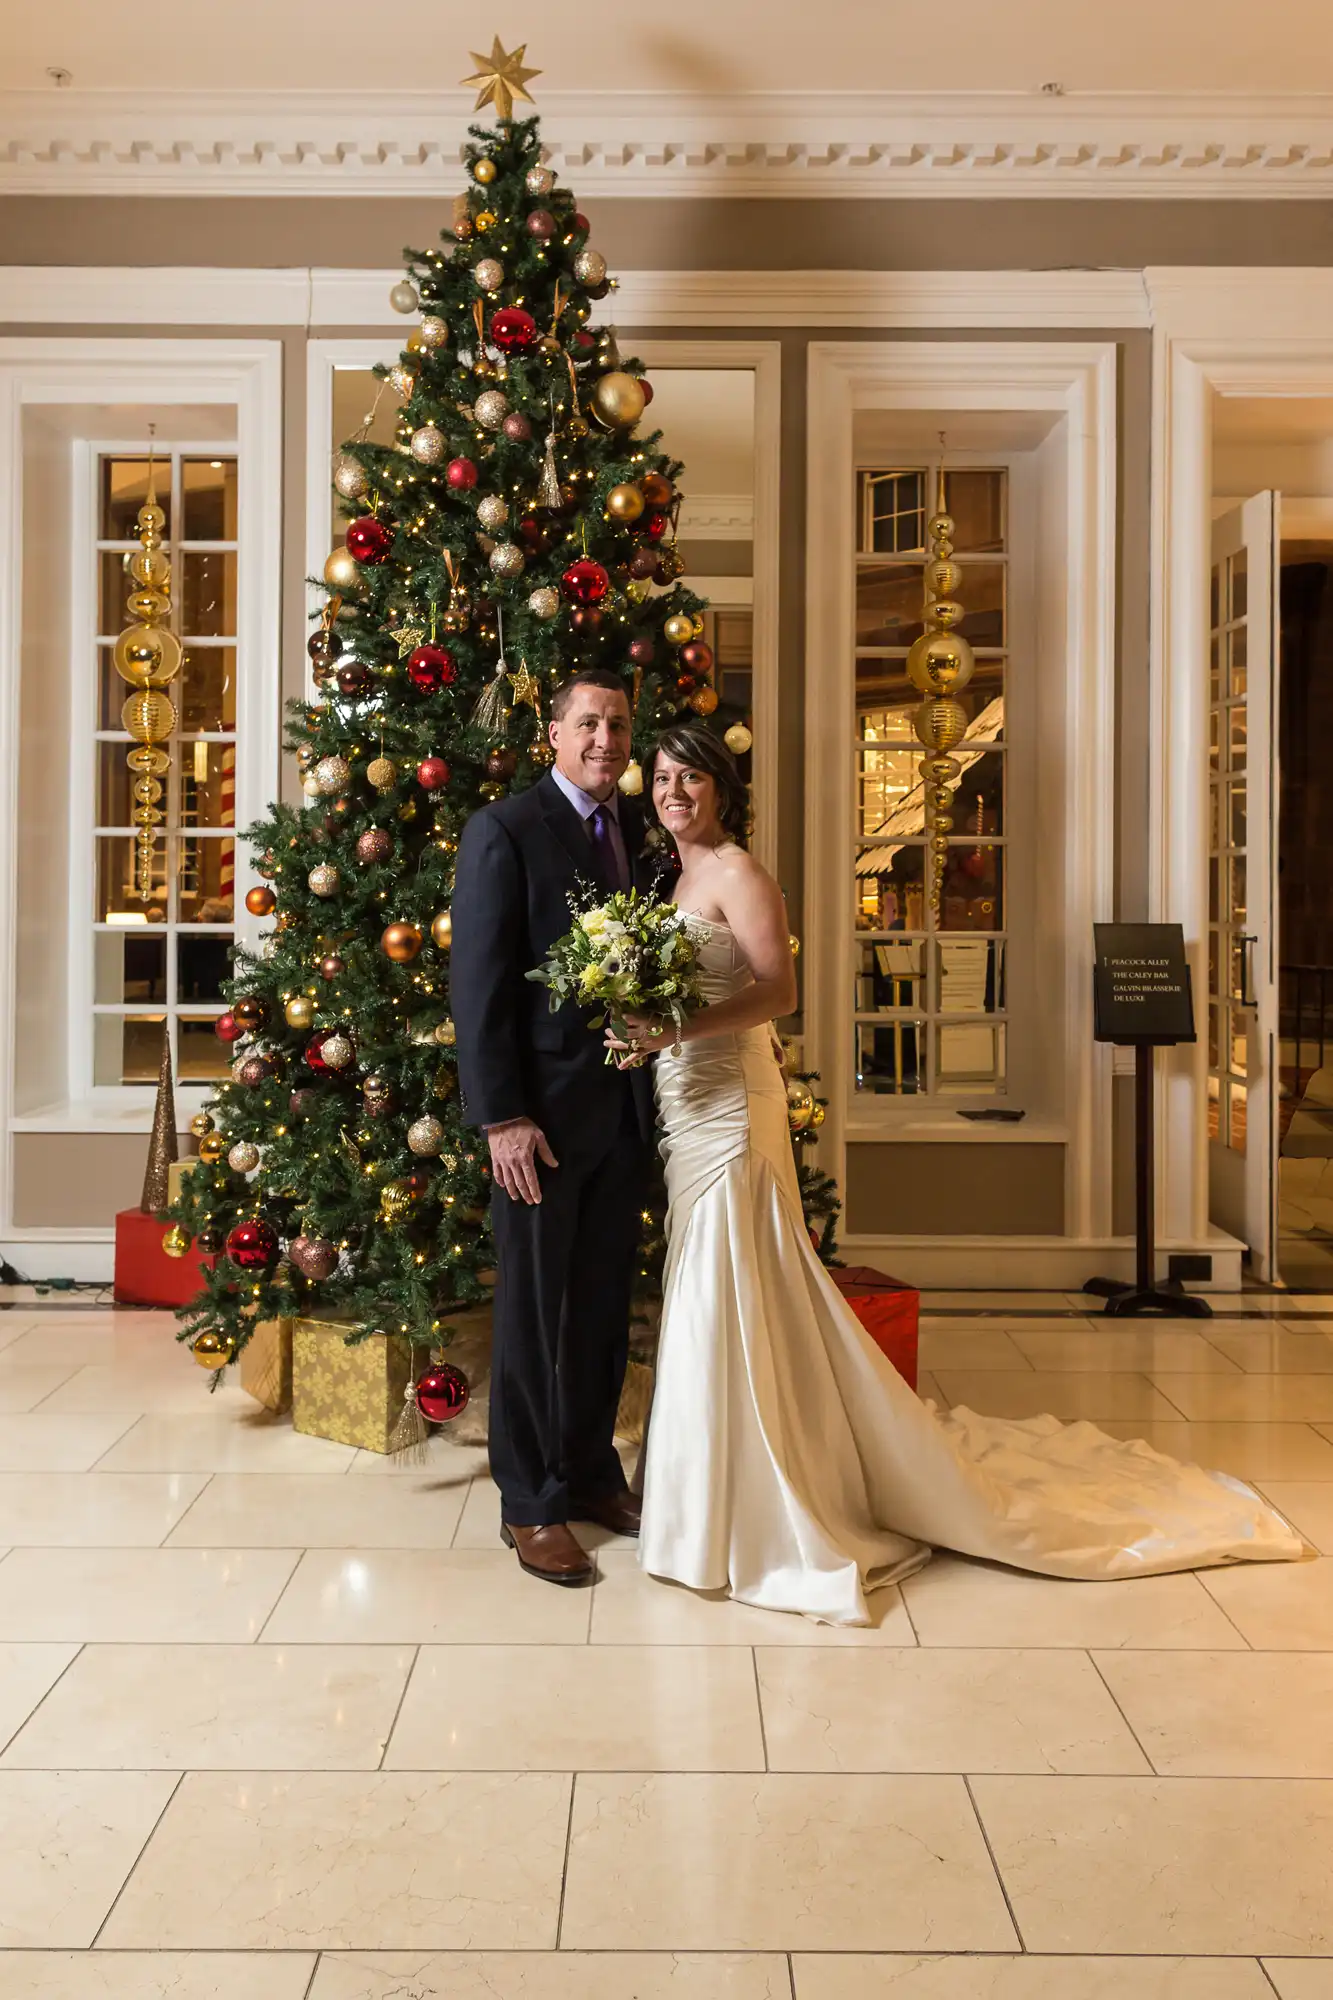 A couple in wedding attire posing in front of a tall christmas tree decorated with red and gold ornaments in a lobby.